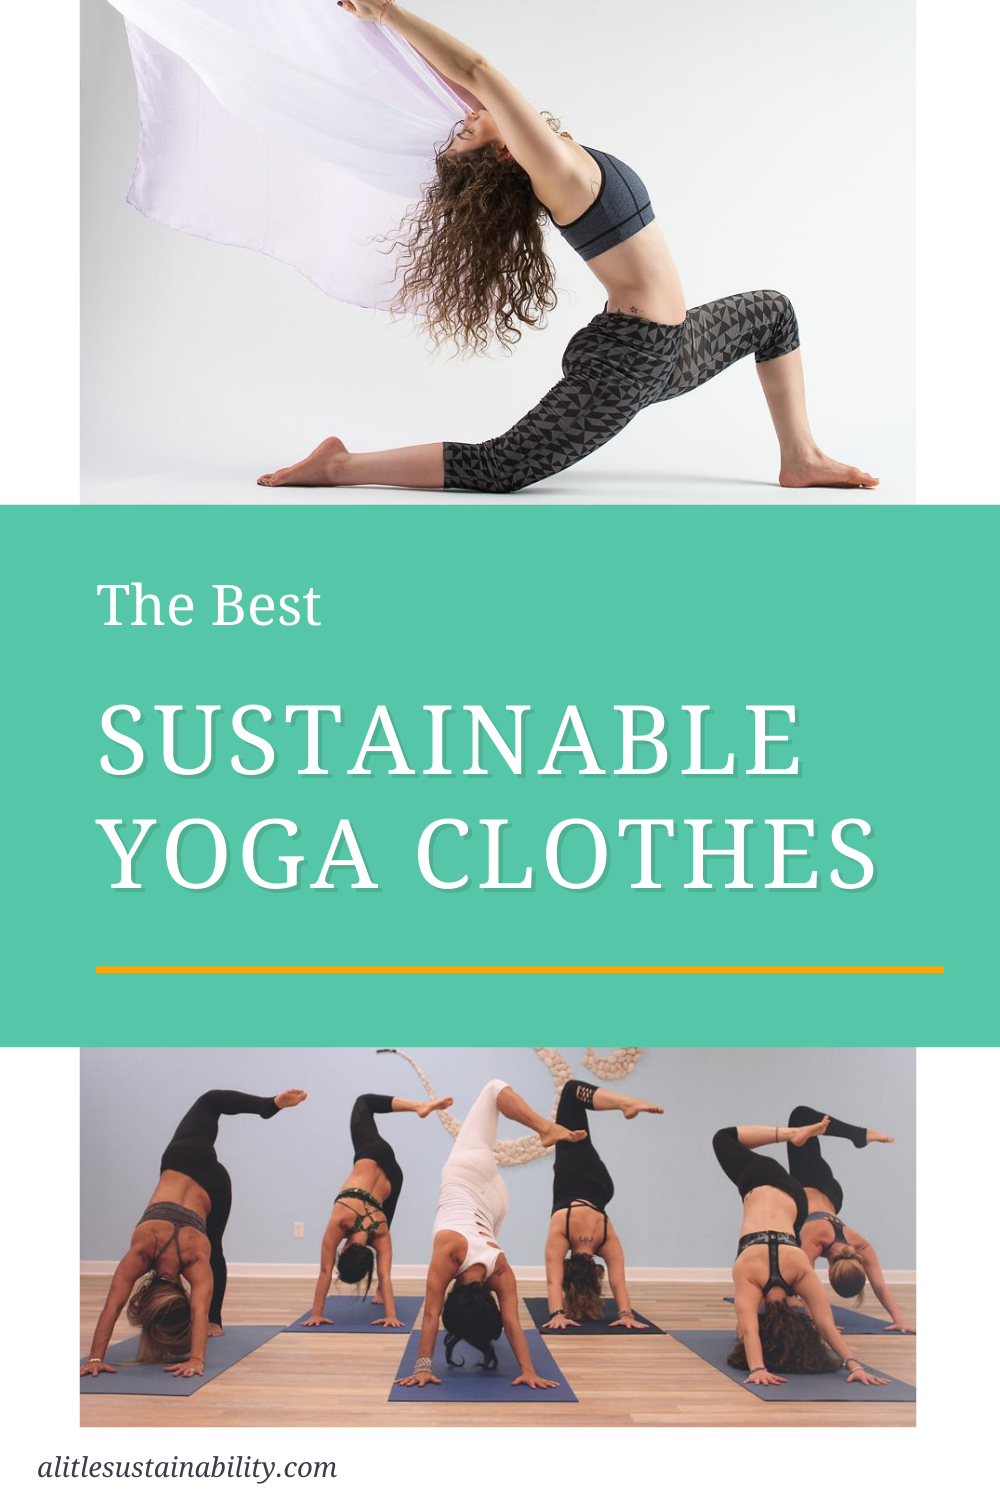 Sustainable Ways to Clean Cotton Yoga Wear — RAMÉ Ethical wear